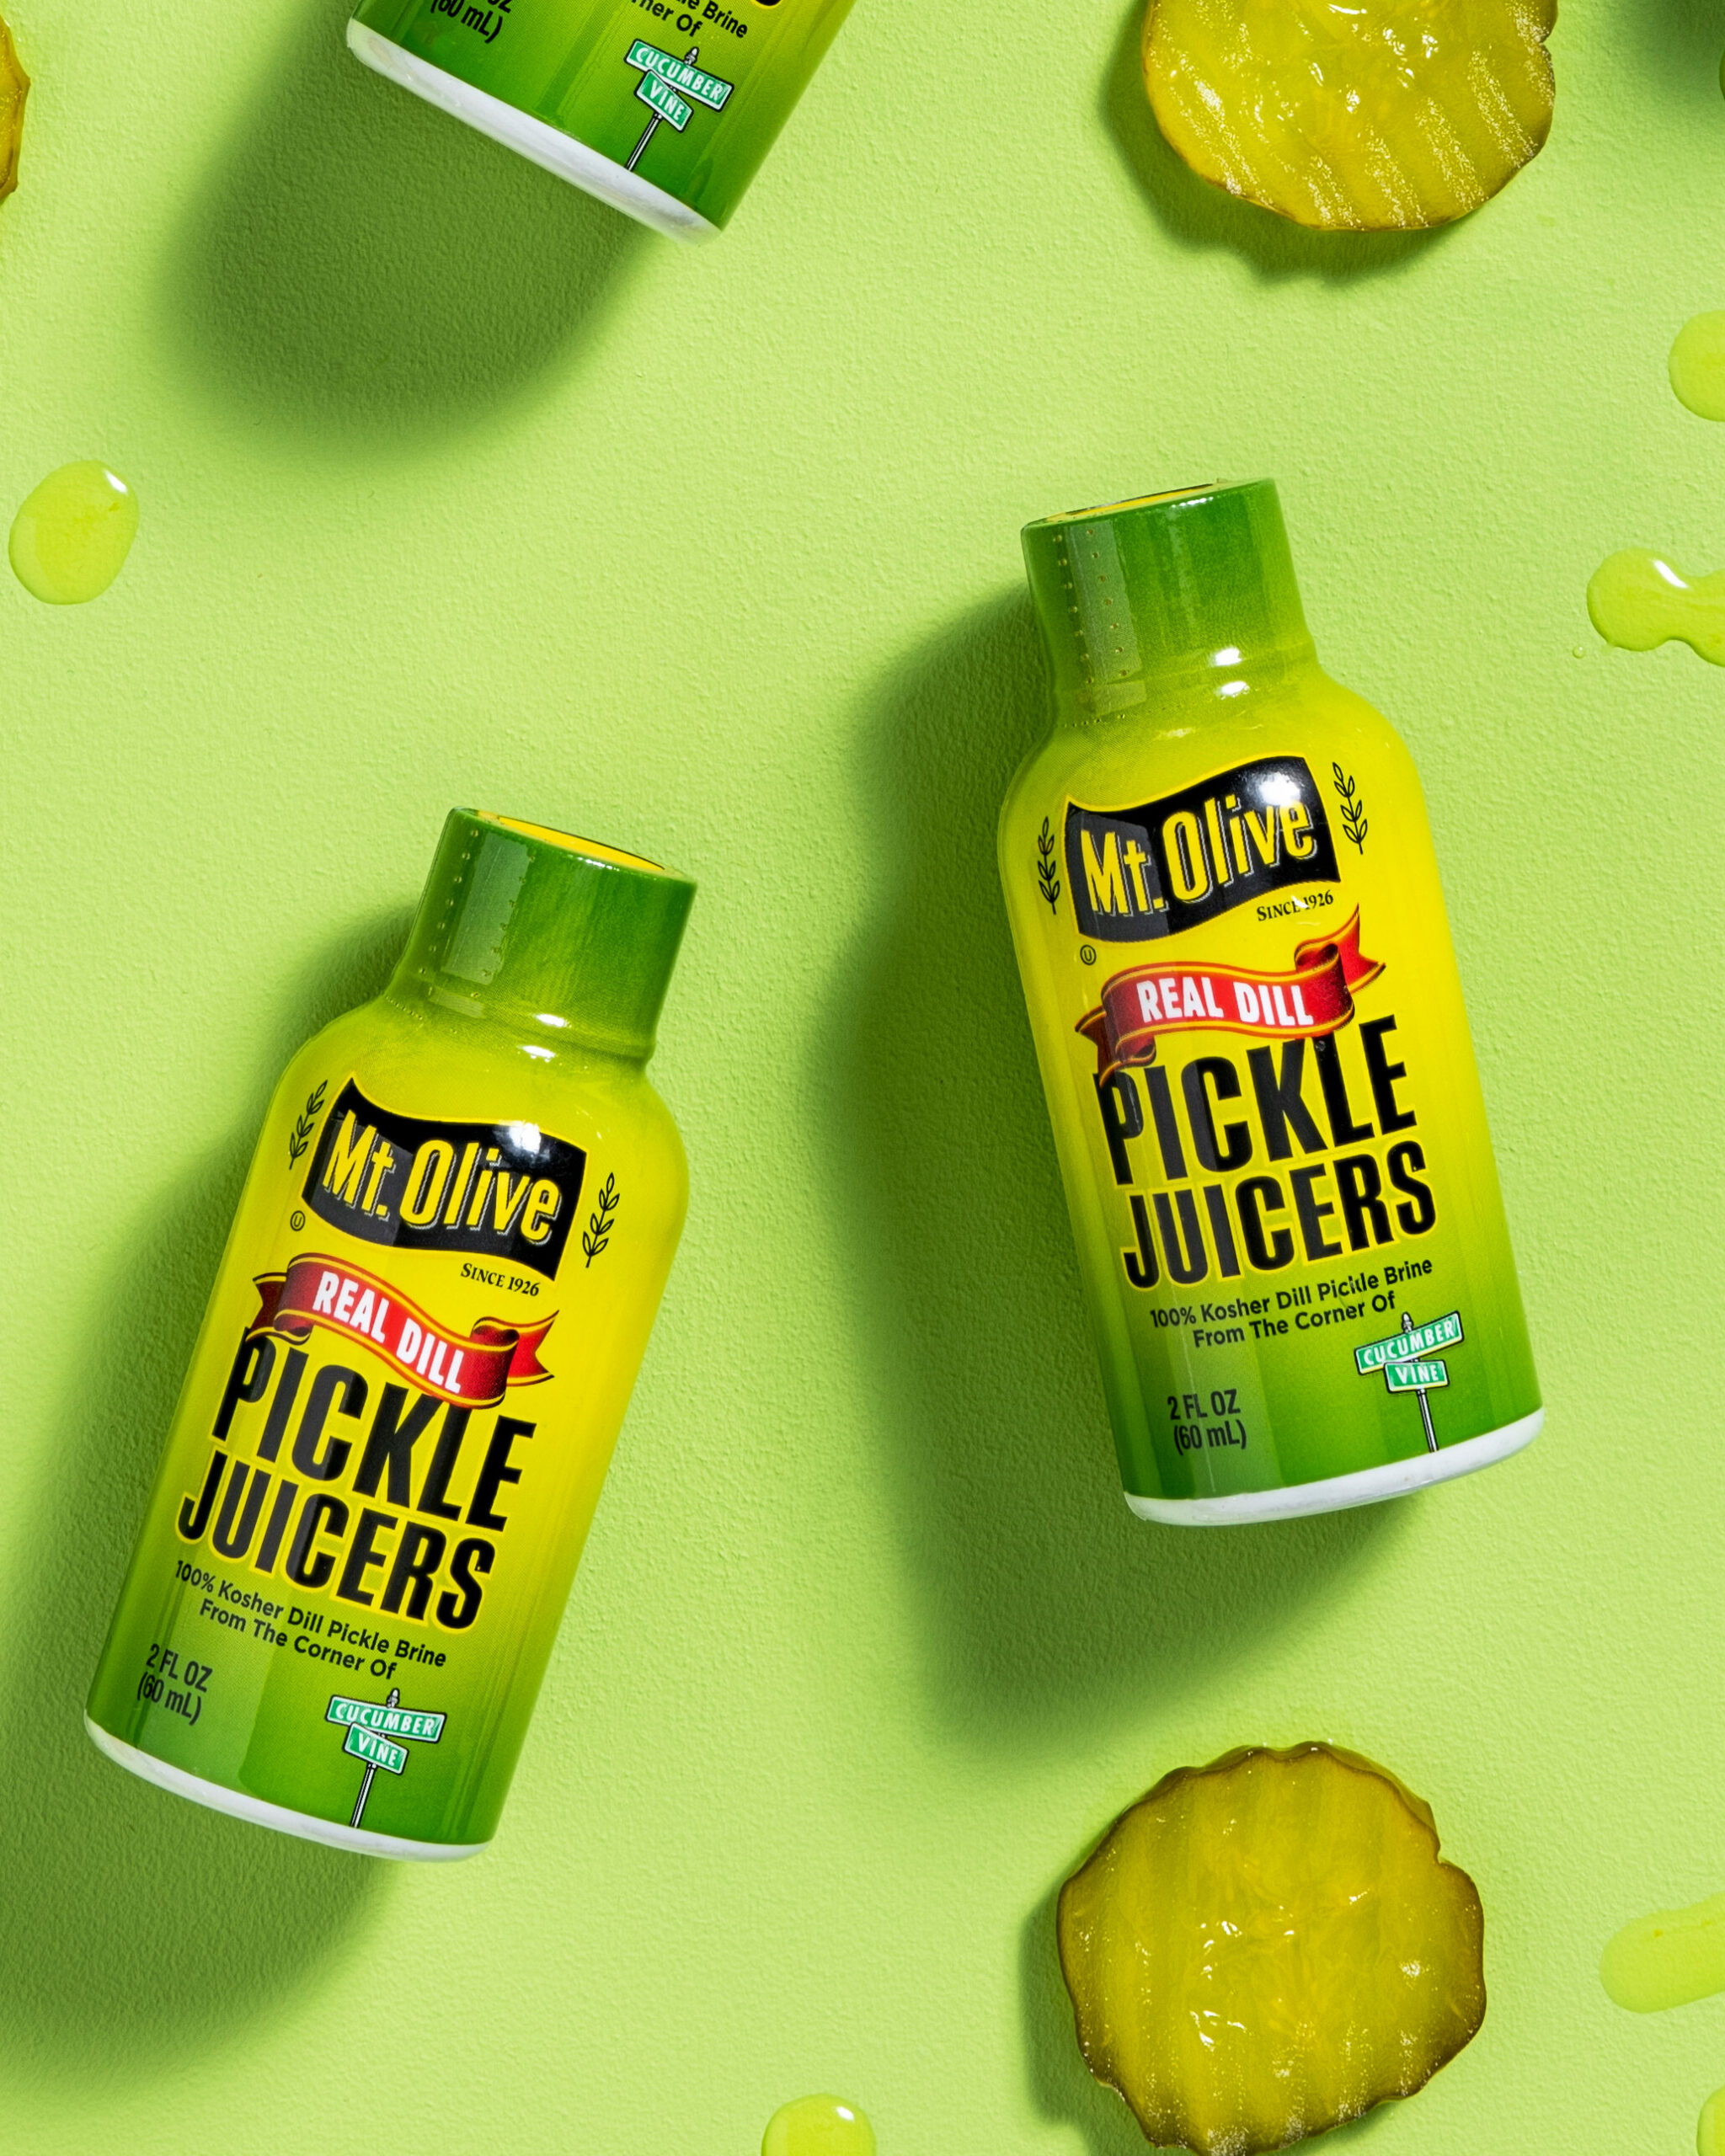 pickle juicers 2 oz bottles with pickle chips and droplets of pickle juice